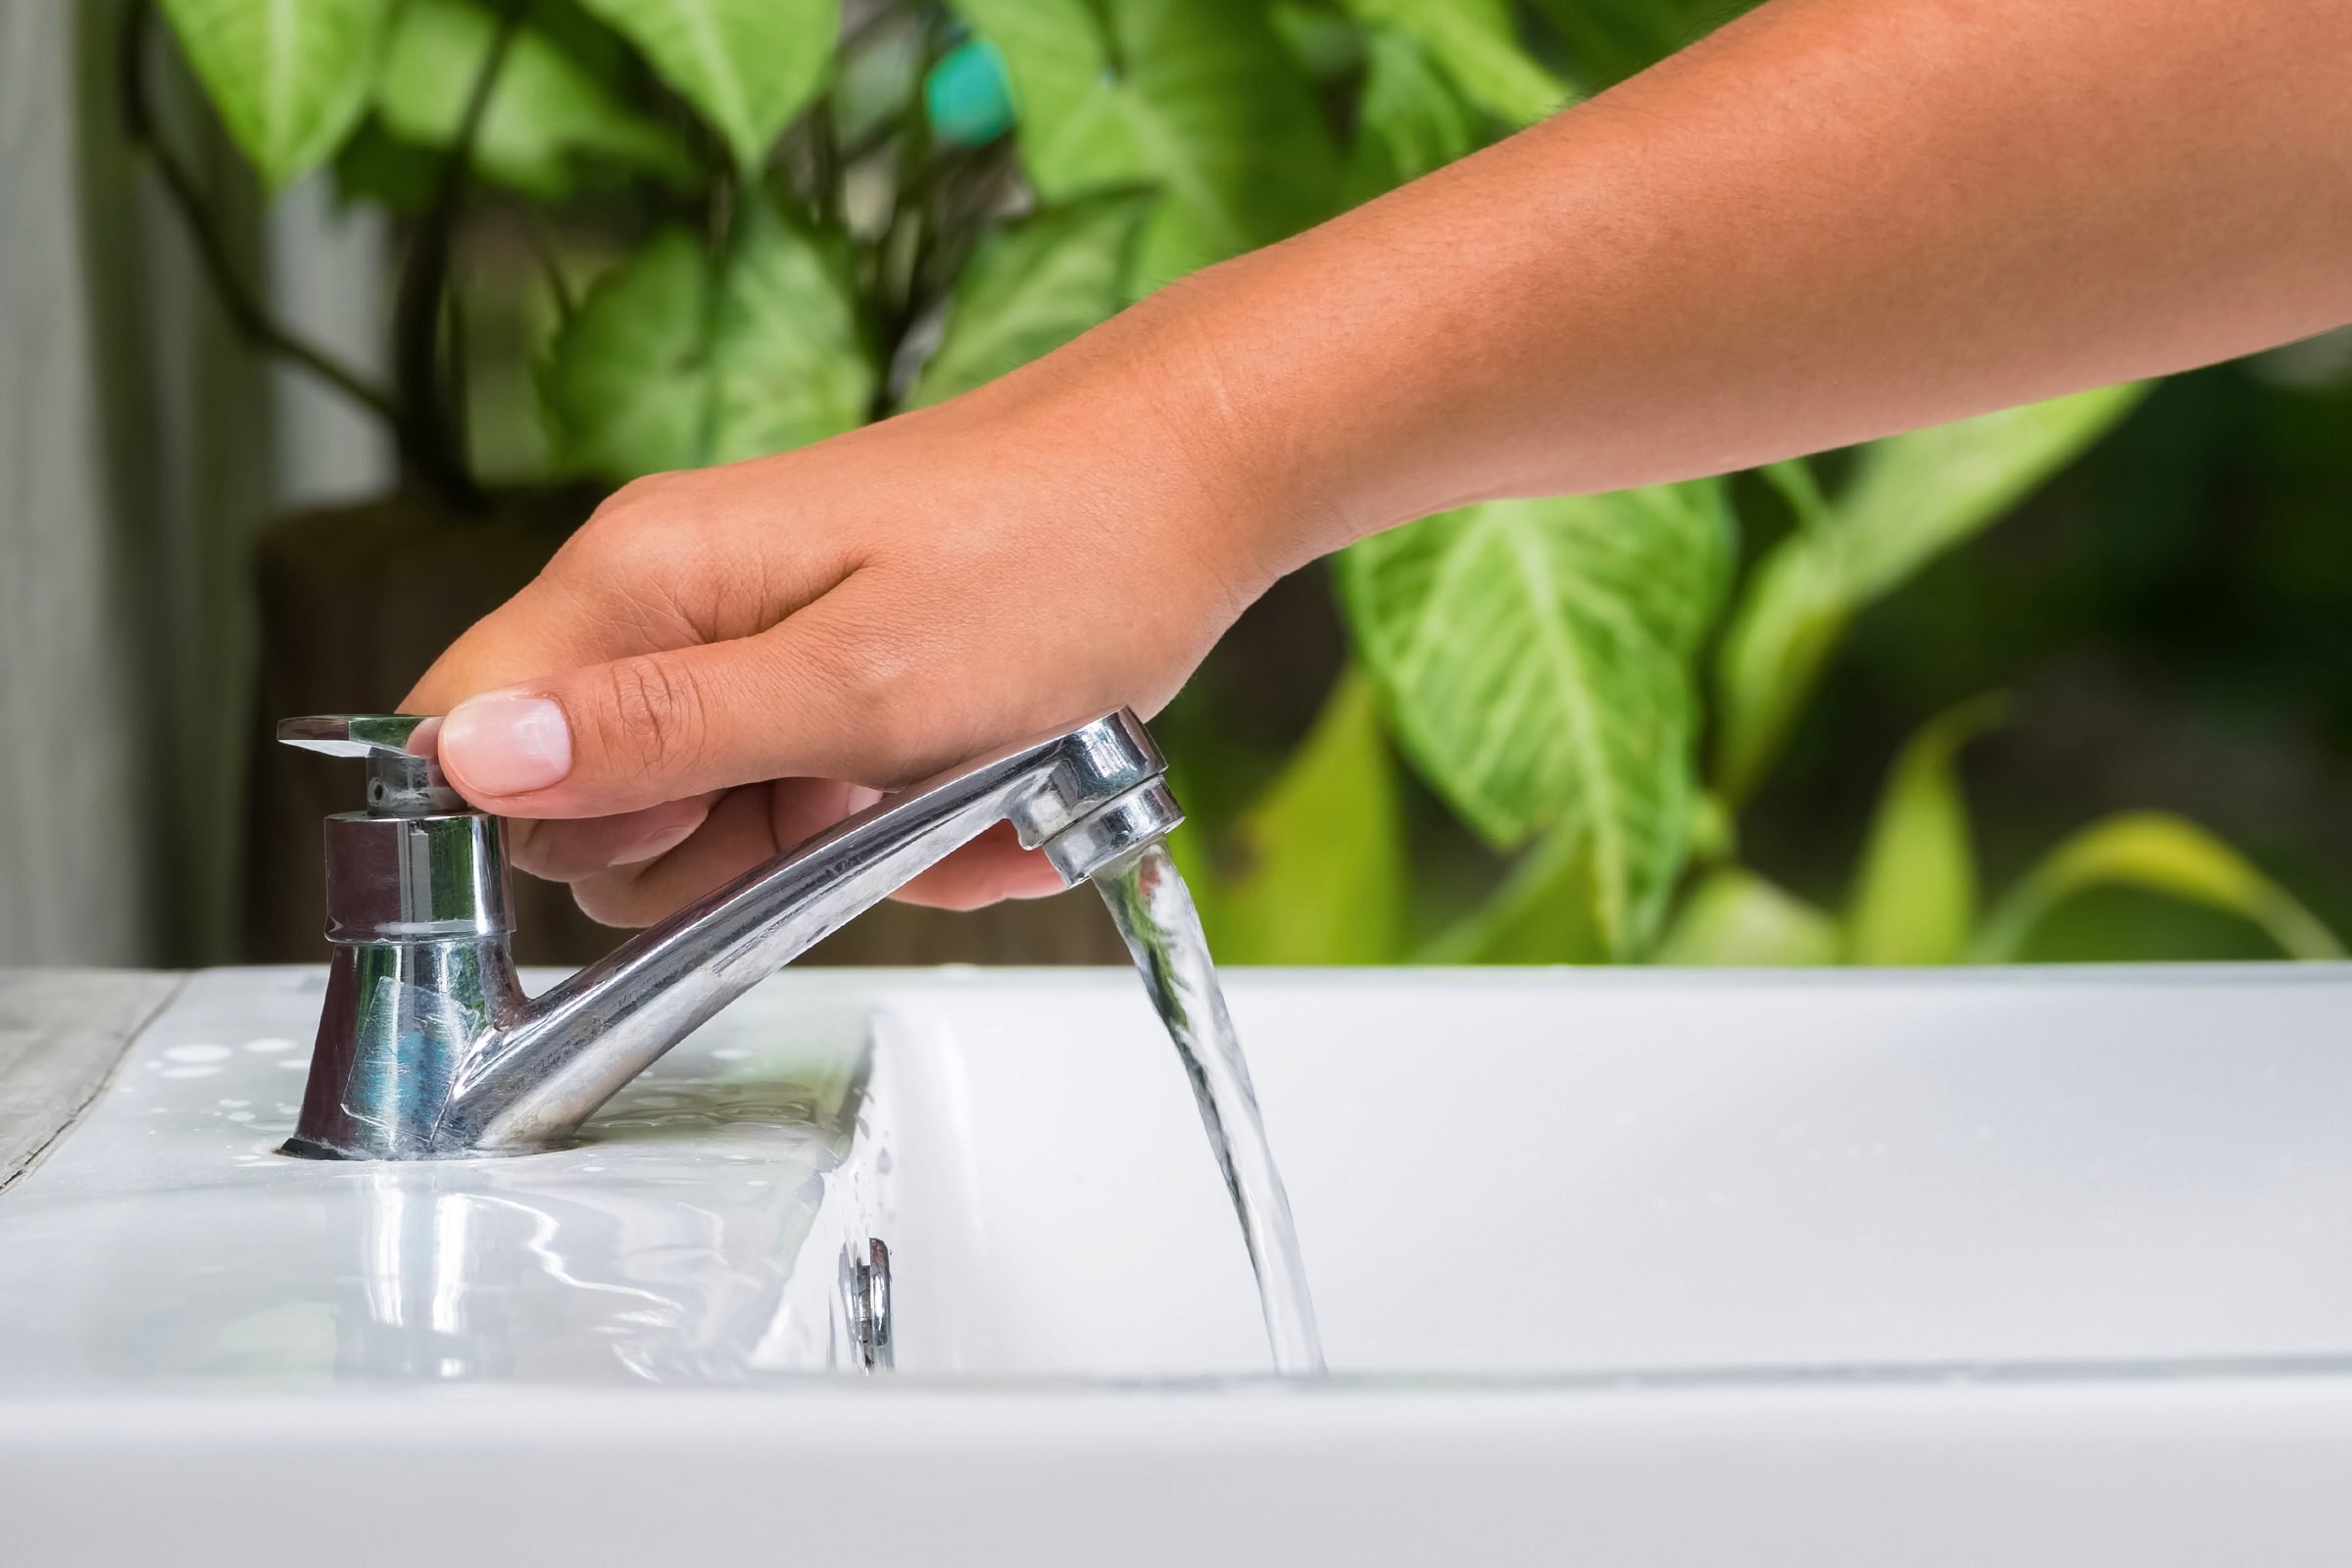 This Cleaning Habit May Be Wasting Gallons Of Water Per Year